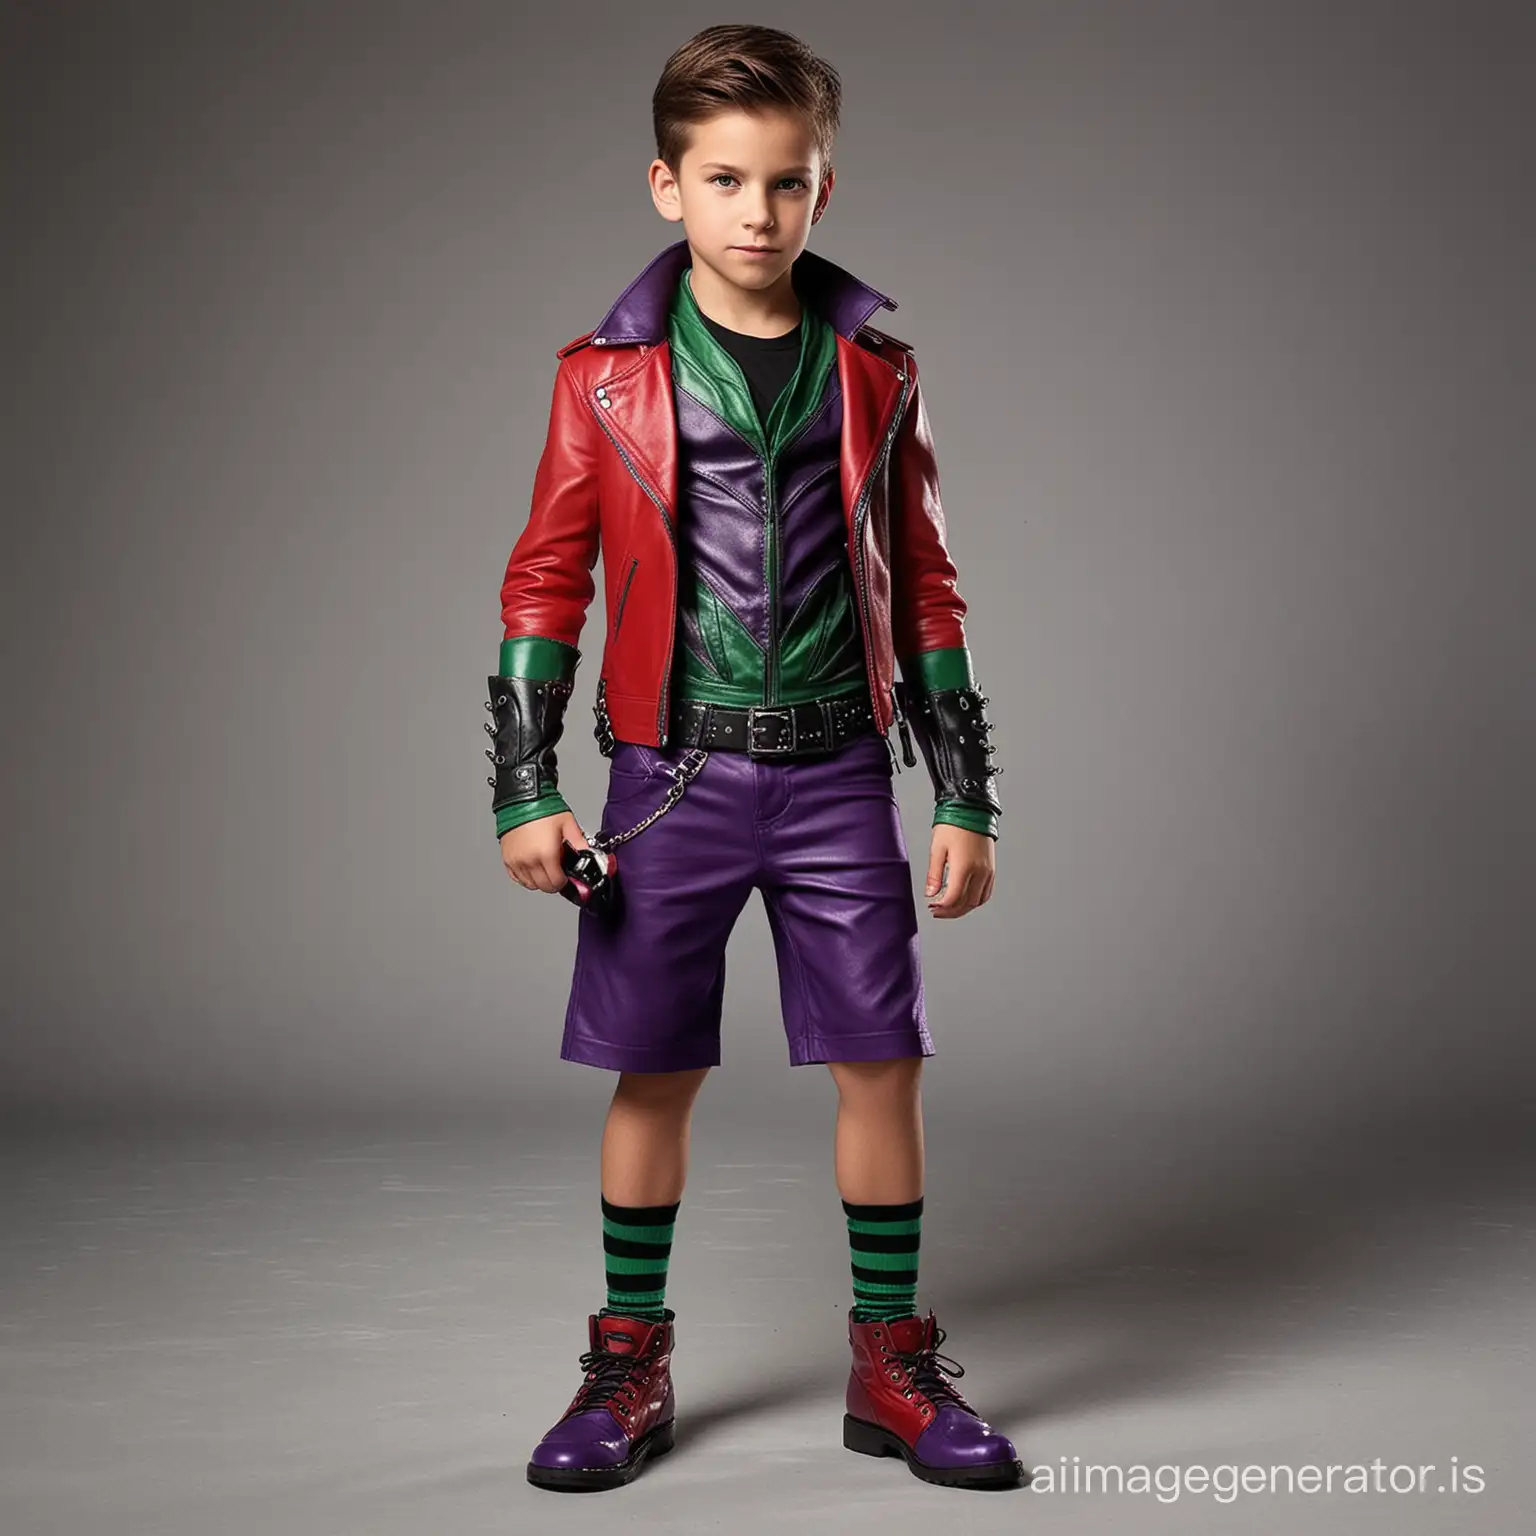 Intimidating-Purple-Villain-Outfit-for-an-8YearOld-with-Cool-Leather-Shorts